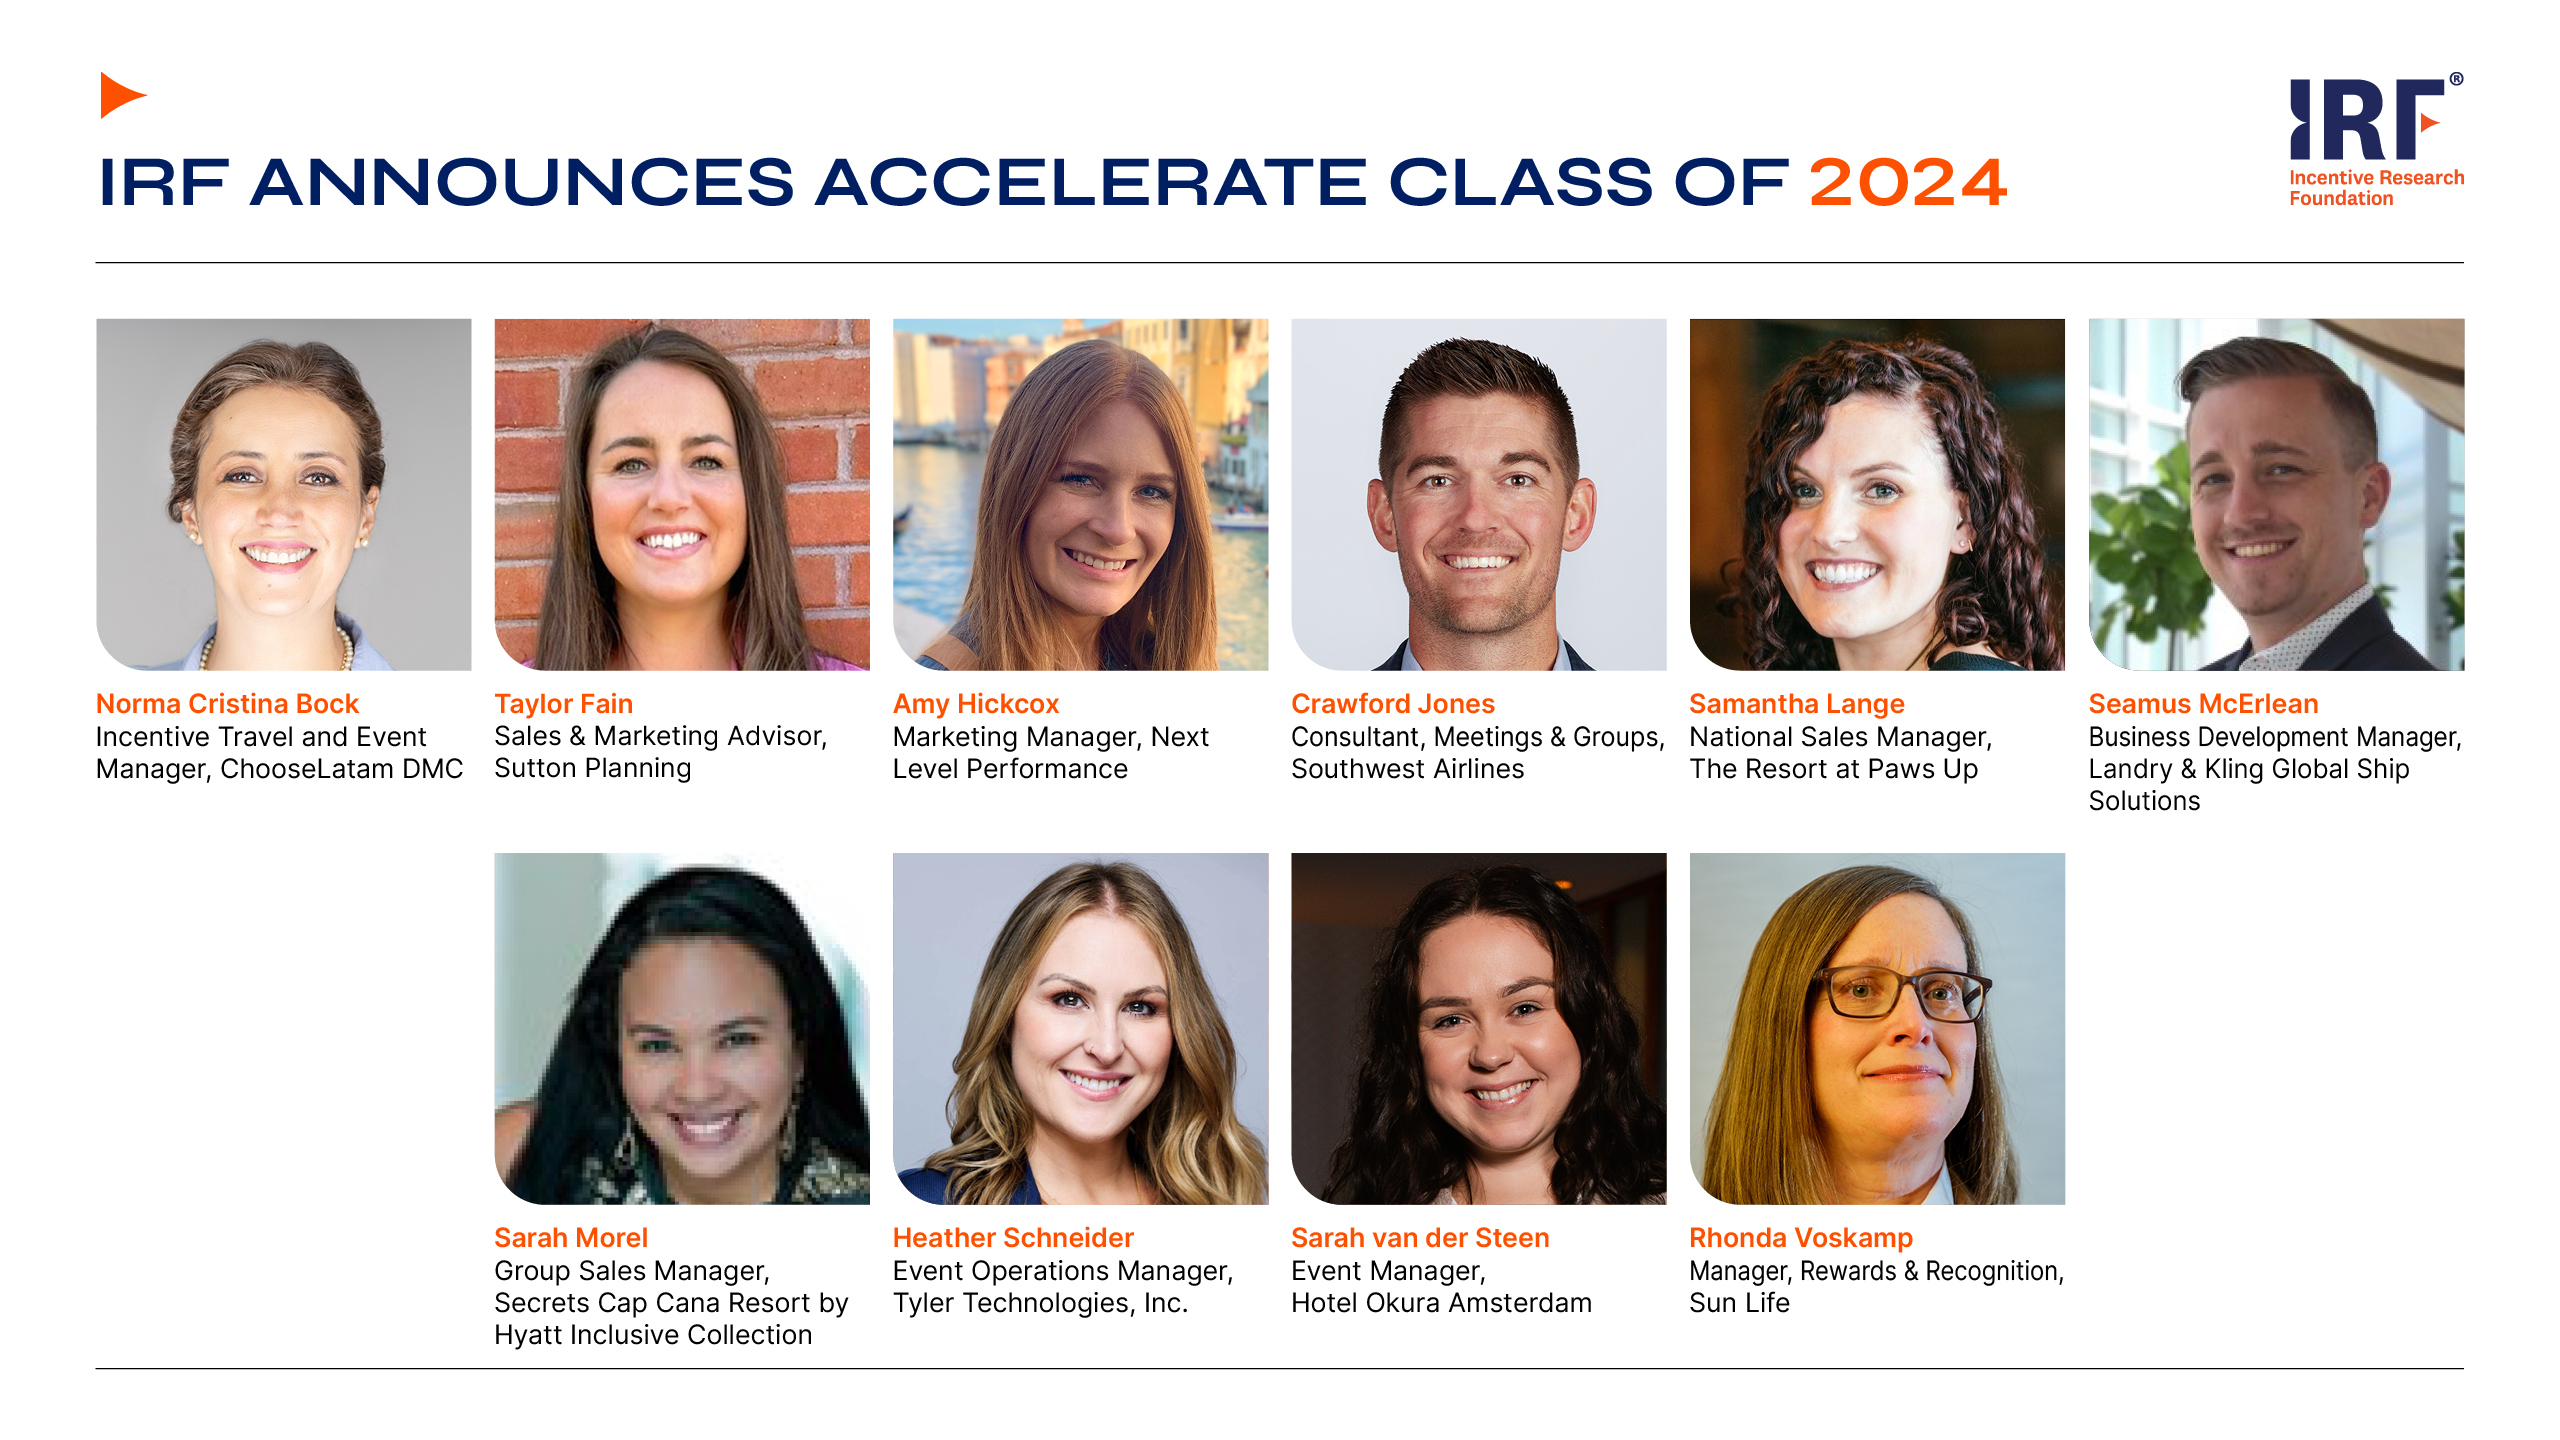 IRF Announces Accelerate Class of 2024 